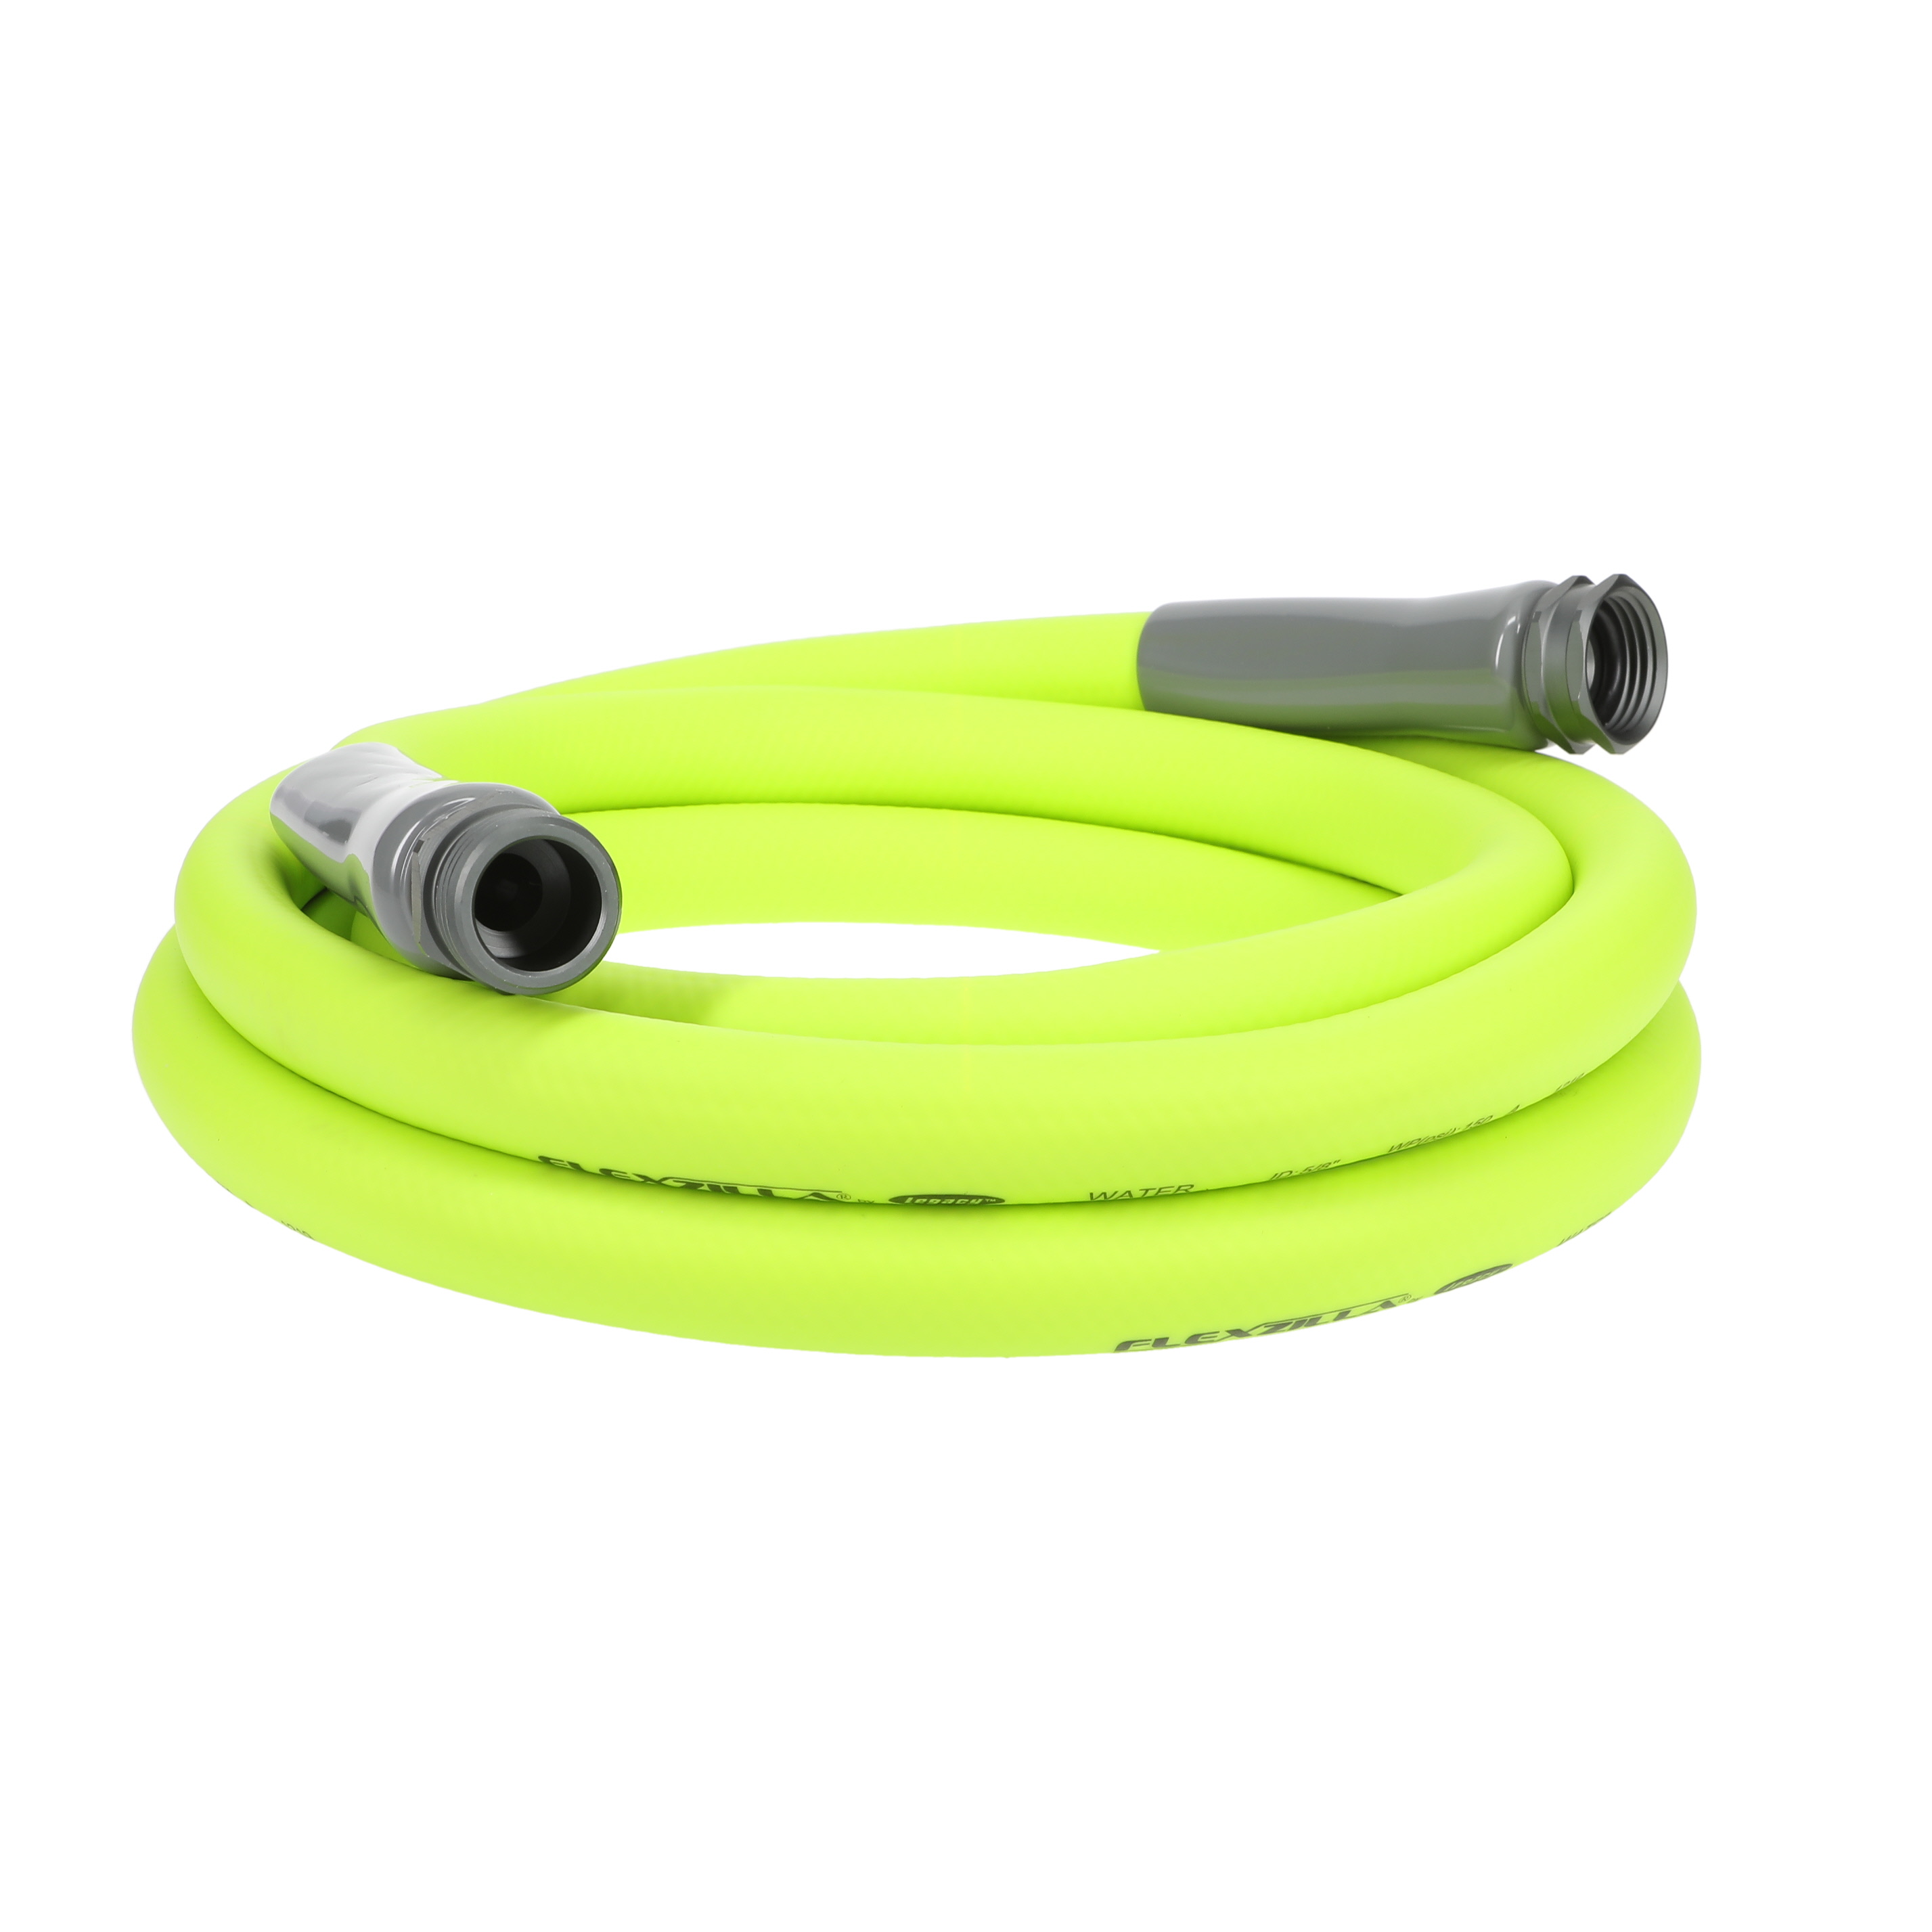 deal: Save 49% on the Flexzilla garden hose this August